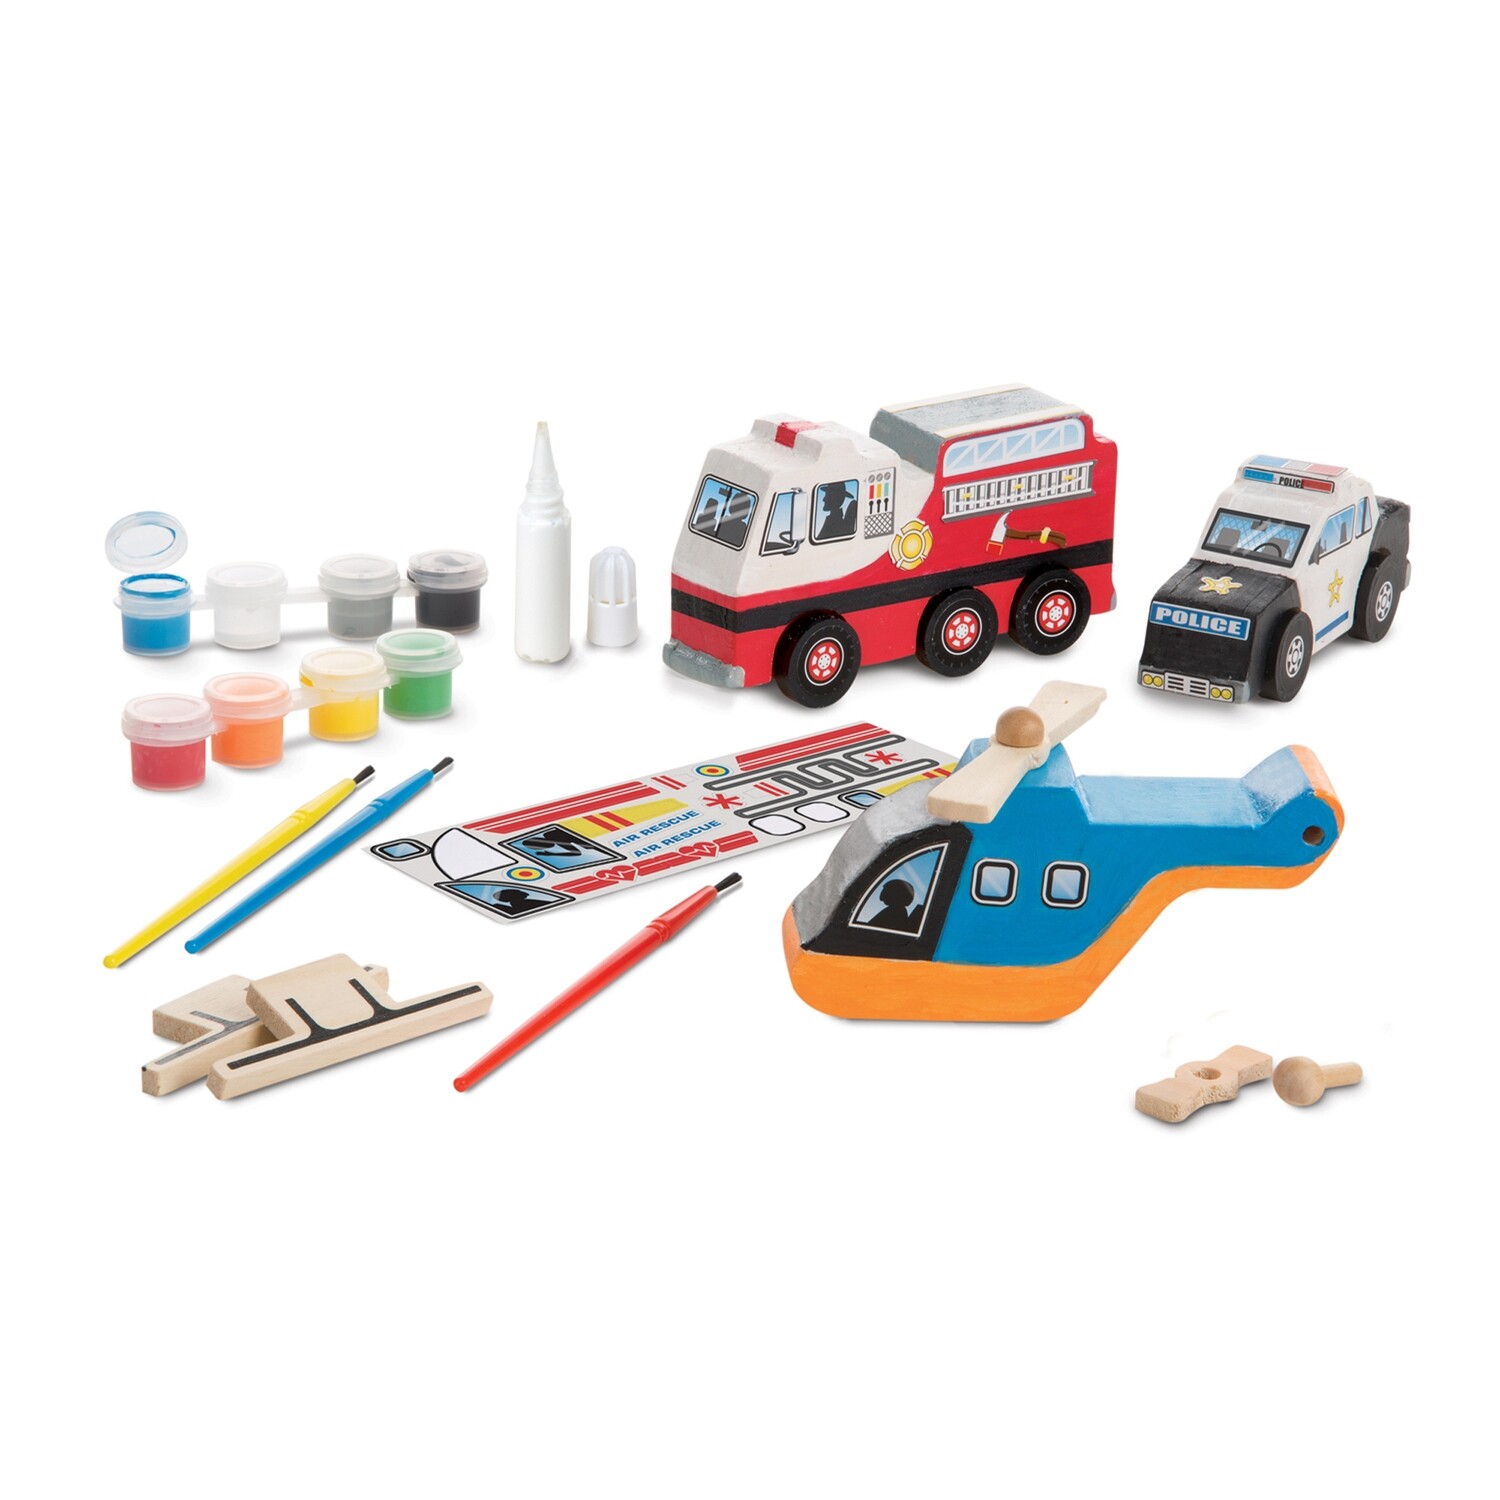 Rescue Vehicles Wooden Craft Kit